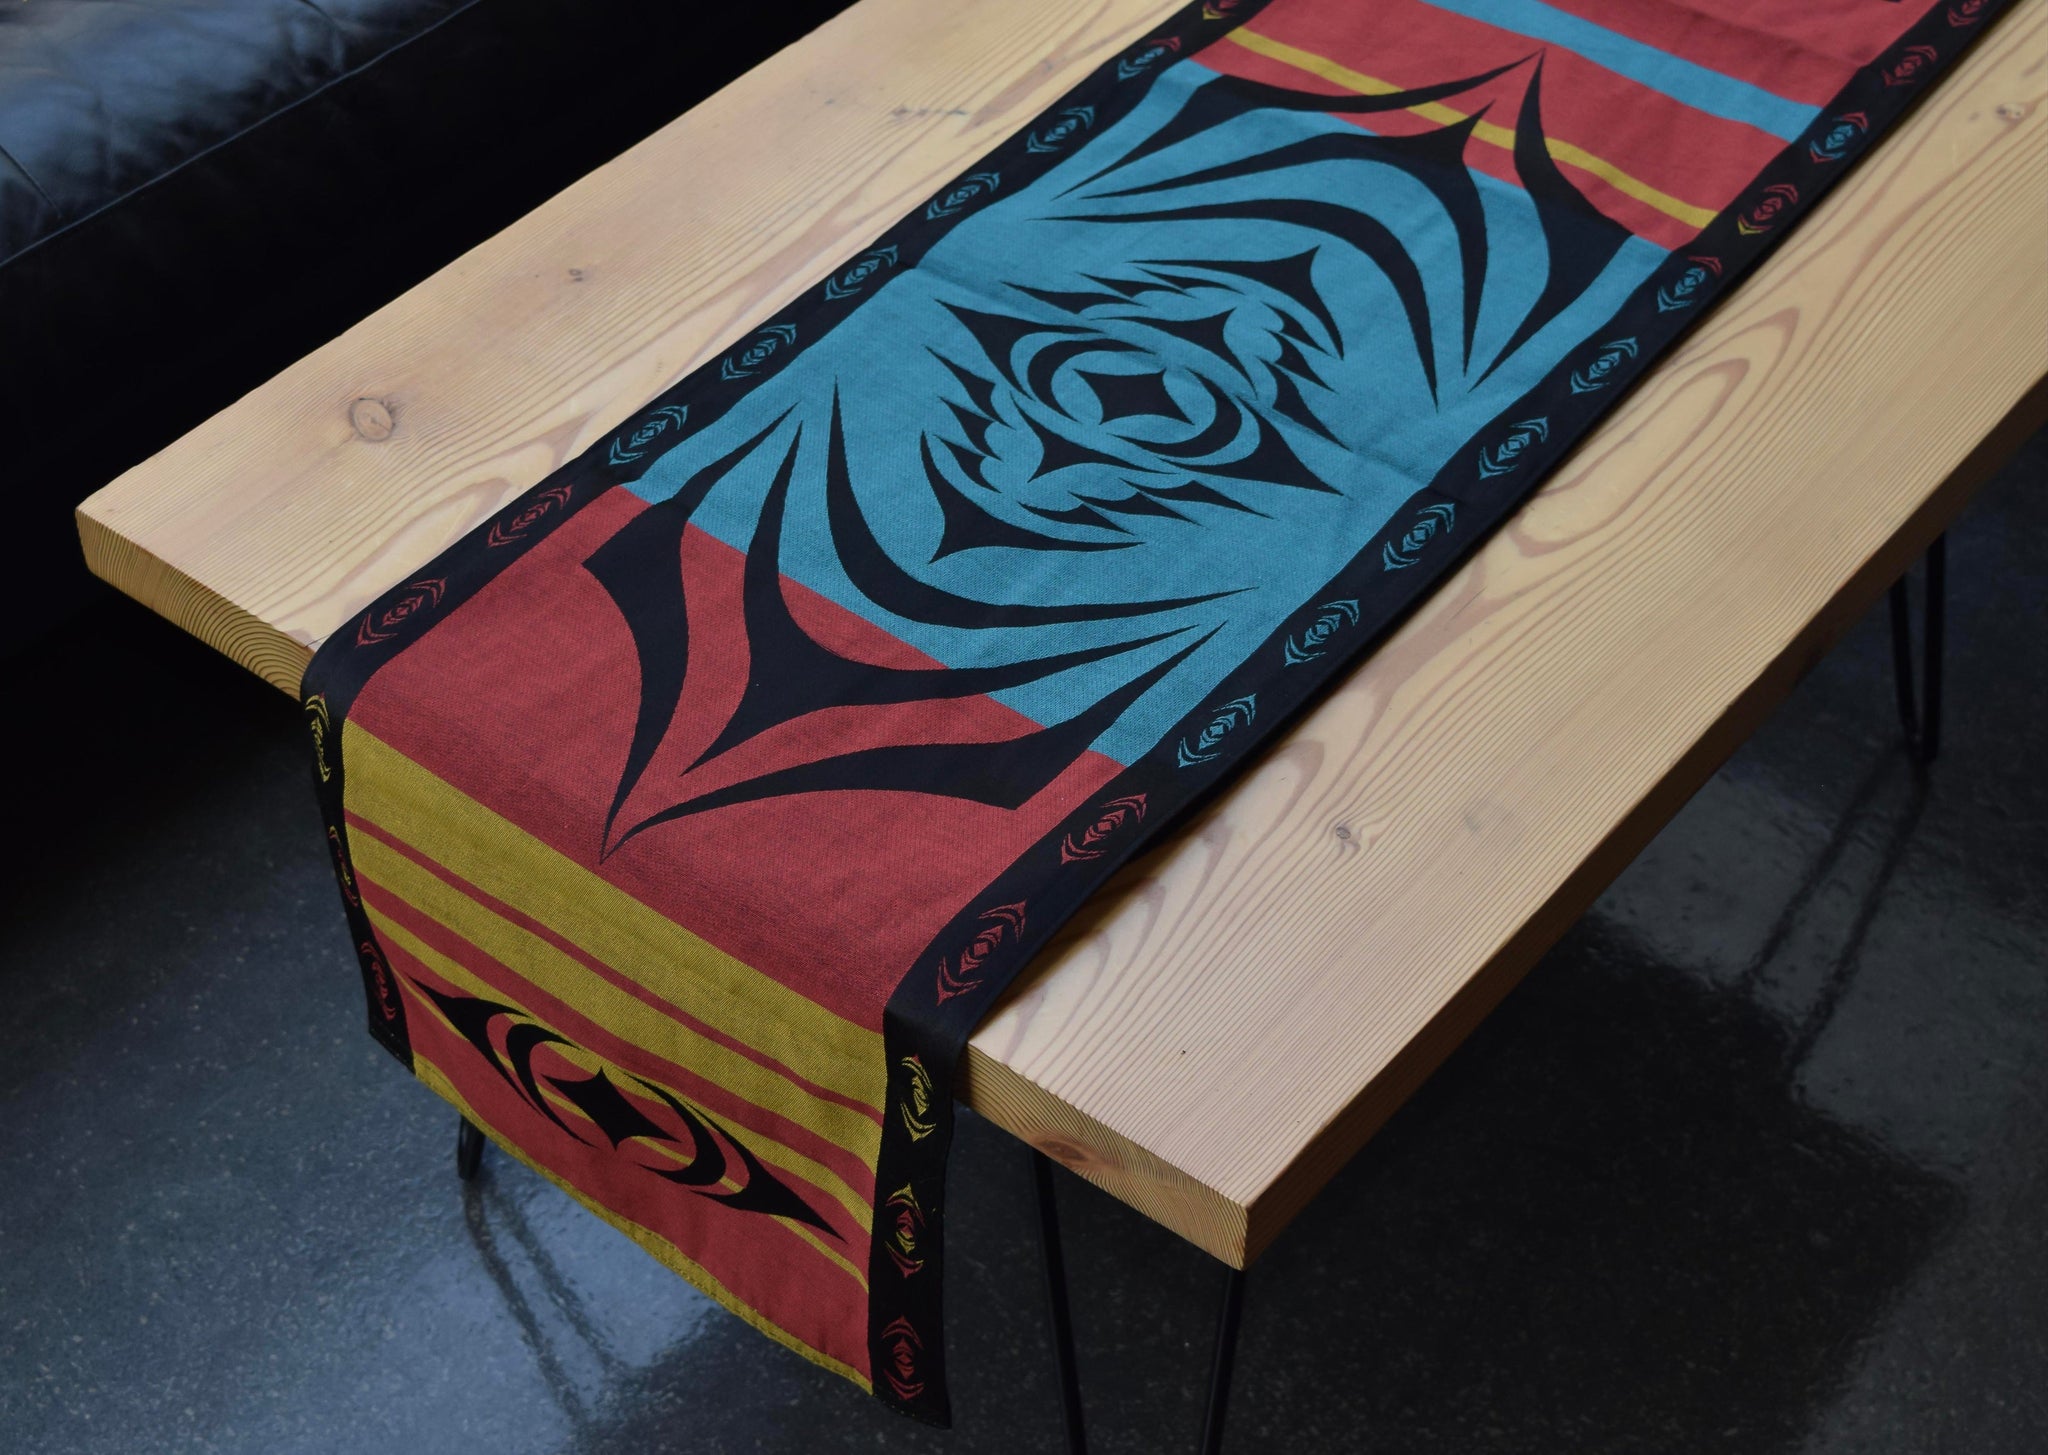 Woven table runner with a striped background of red, yellow, and teal with black borders;  a black starburst-shaped formline design is overlaid on top.